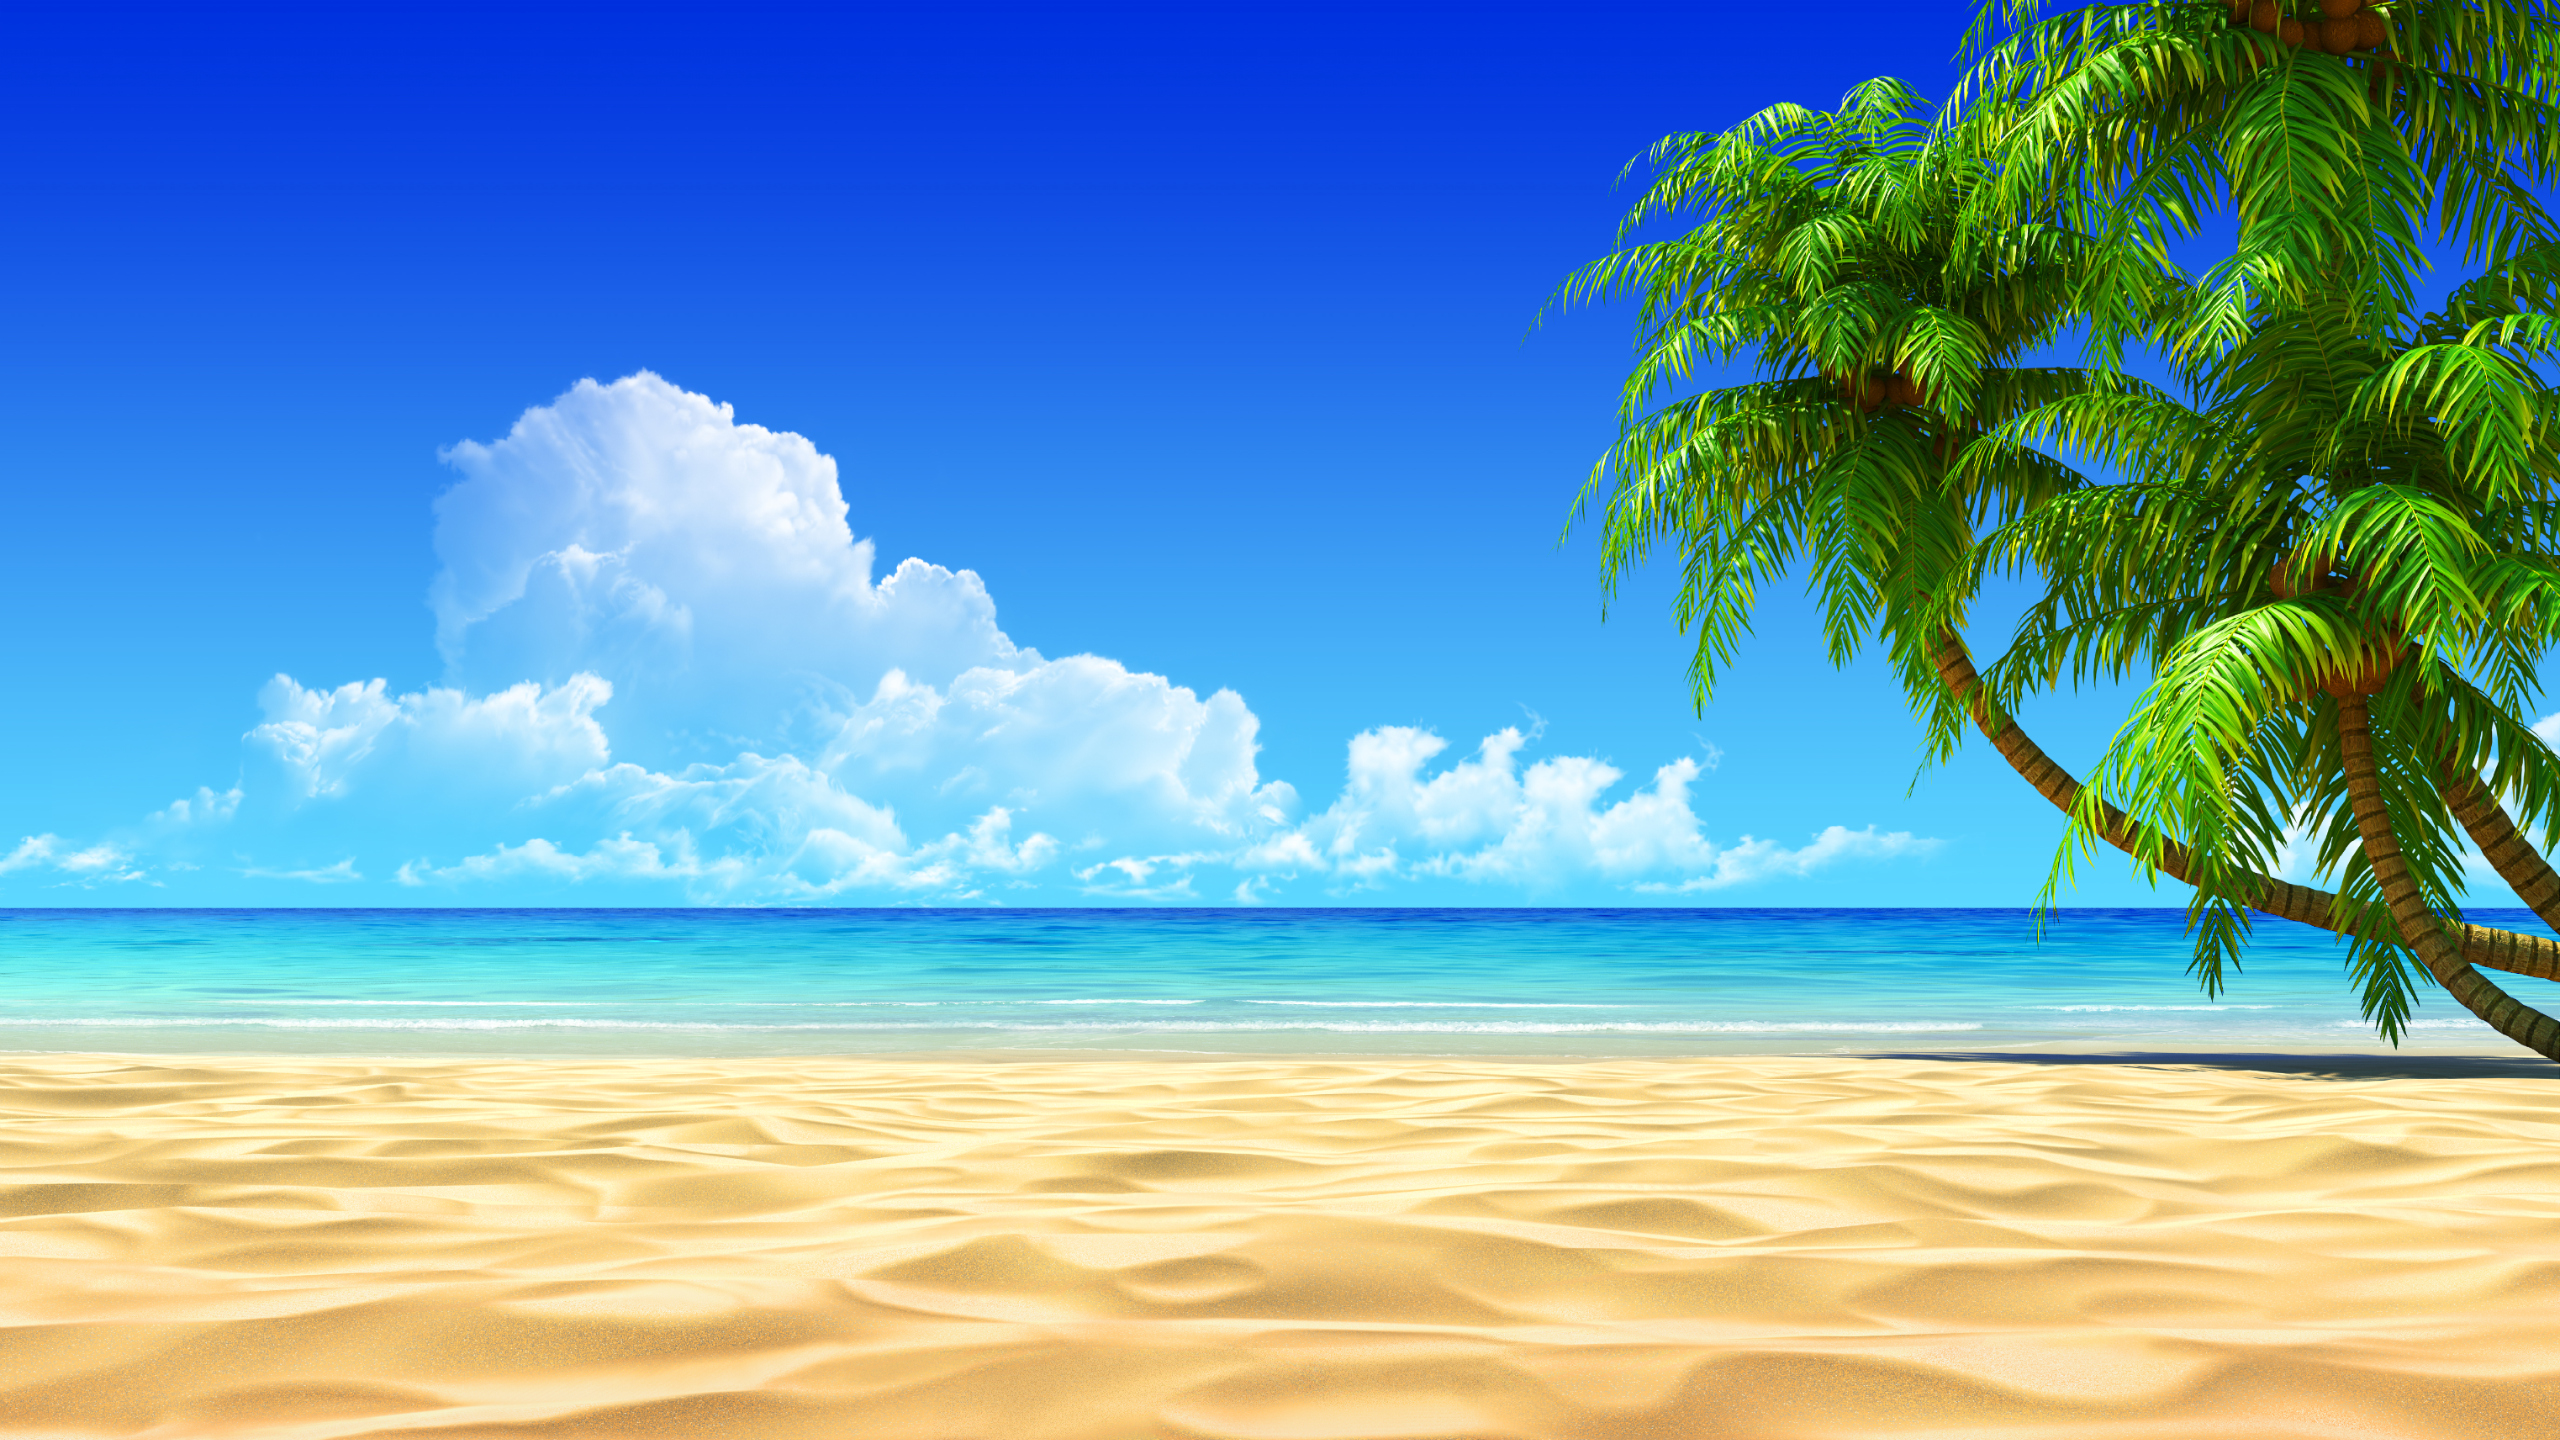 Summer Beach Image Png Images Clipart